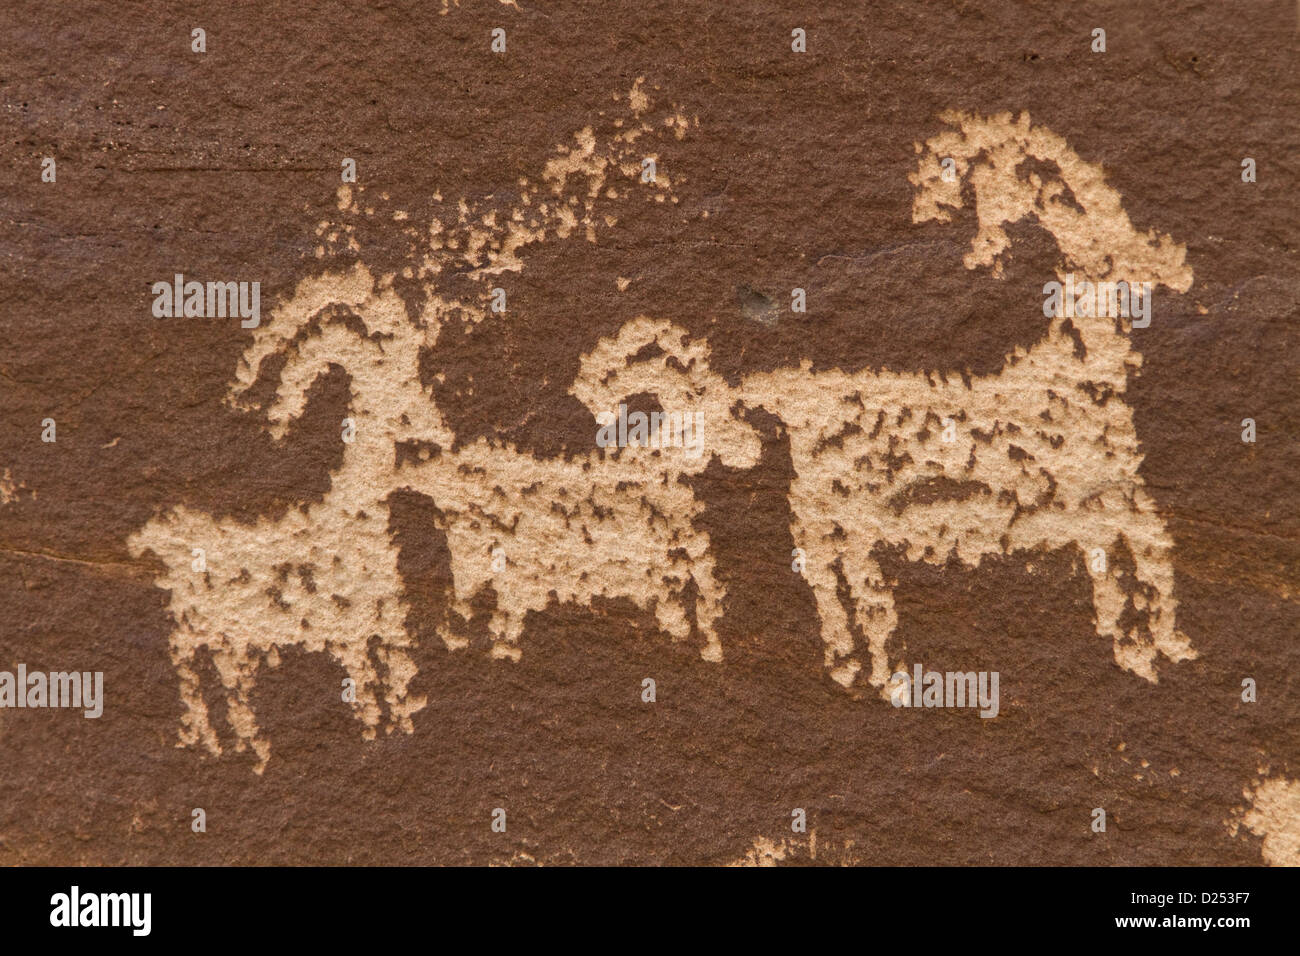 Ute Rock Art Native American petroglyphs in sandstone rock,showing stylized horse rider surrounded bighorn sheep carved between Stock Photo